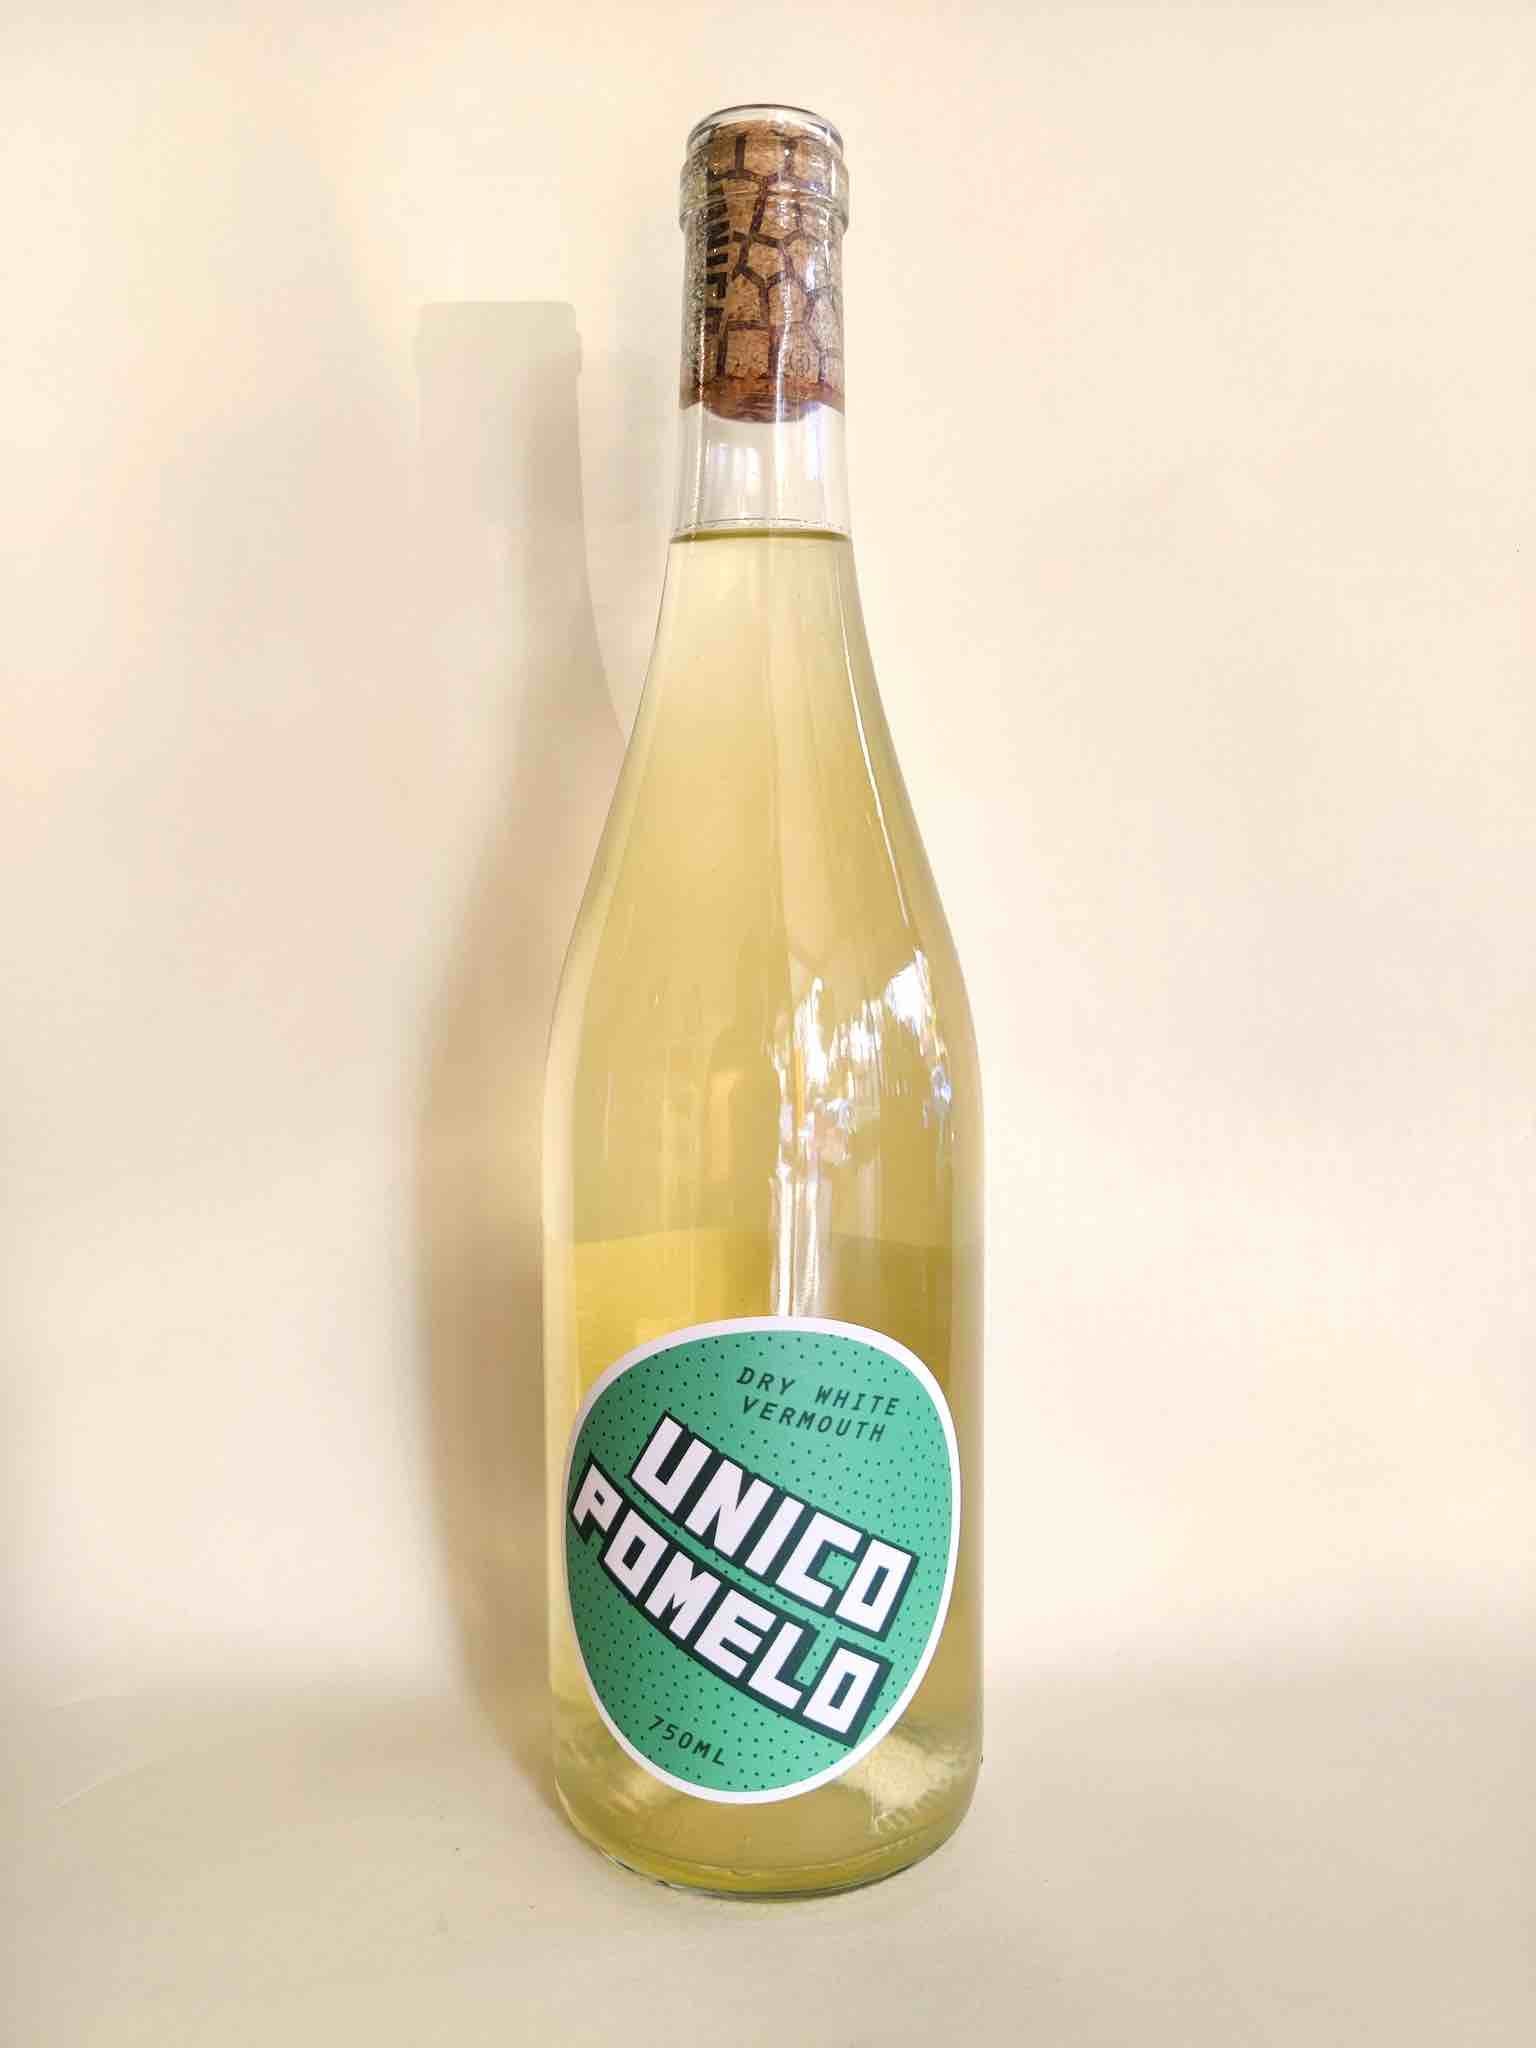 A bottle of Unico Pomelo Dry Vermouth from the Adelaide Hills, South Australia.